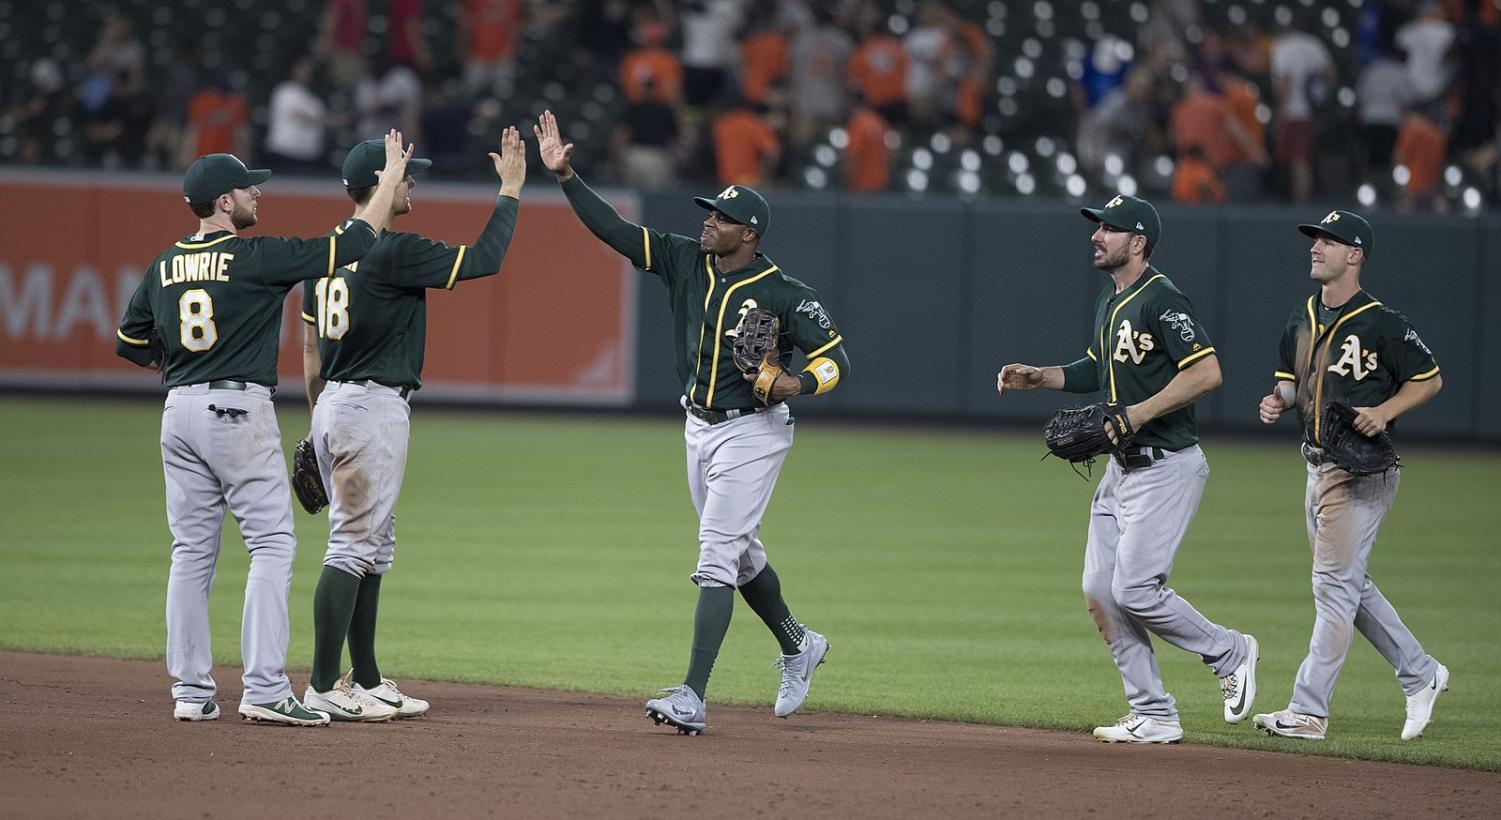 Oakland A's on pace for one of worst seasons in baseball history, Athletics